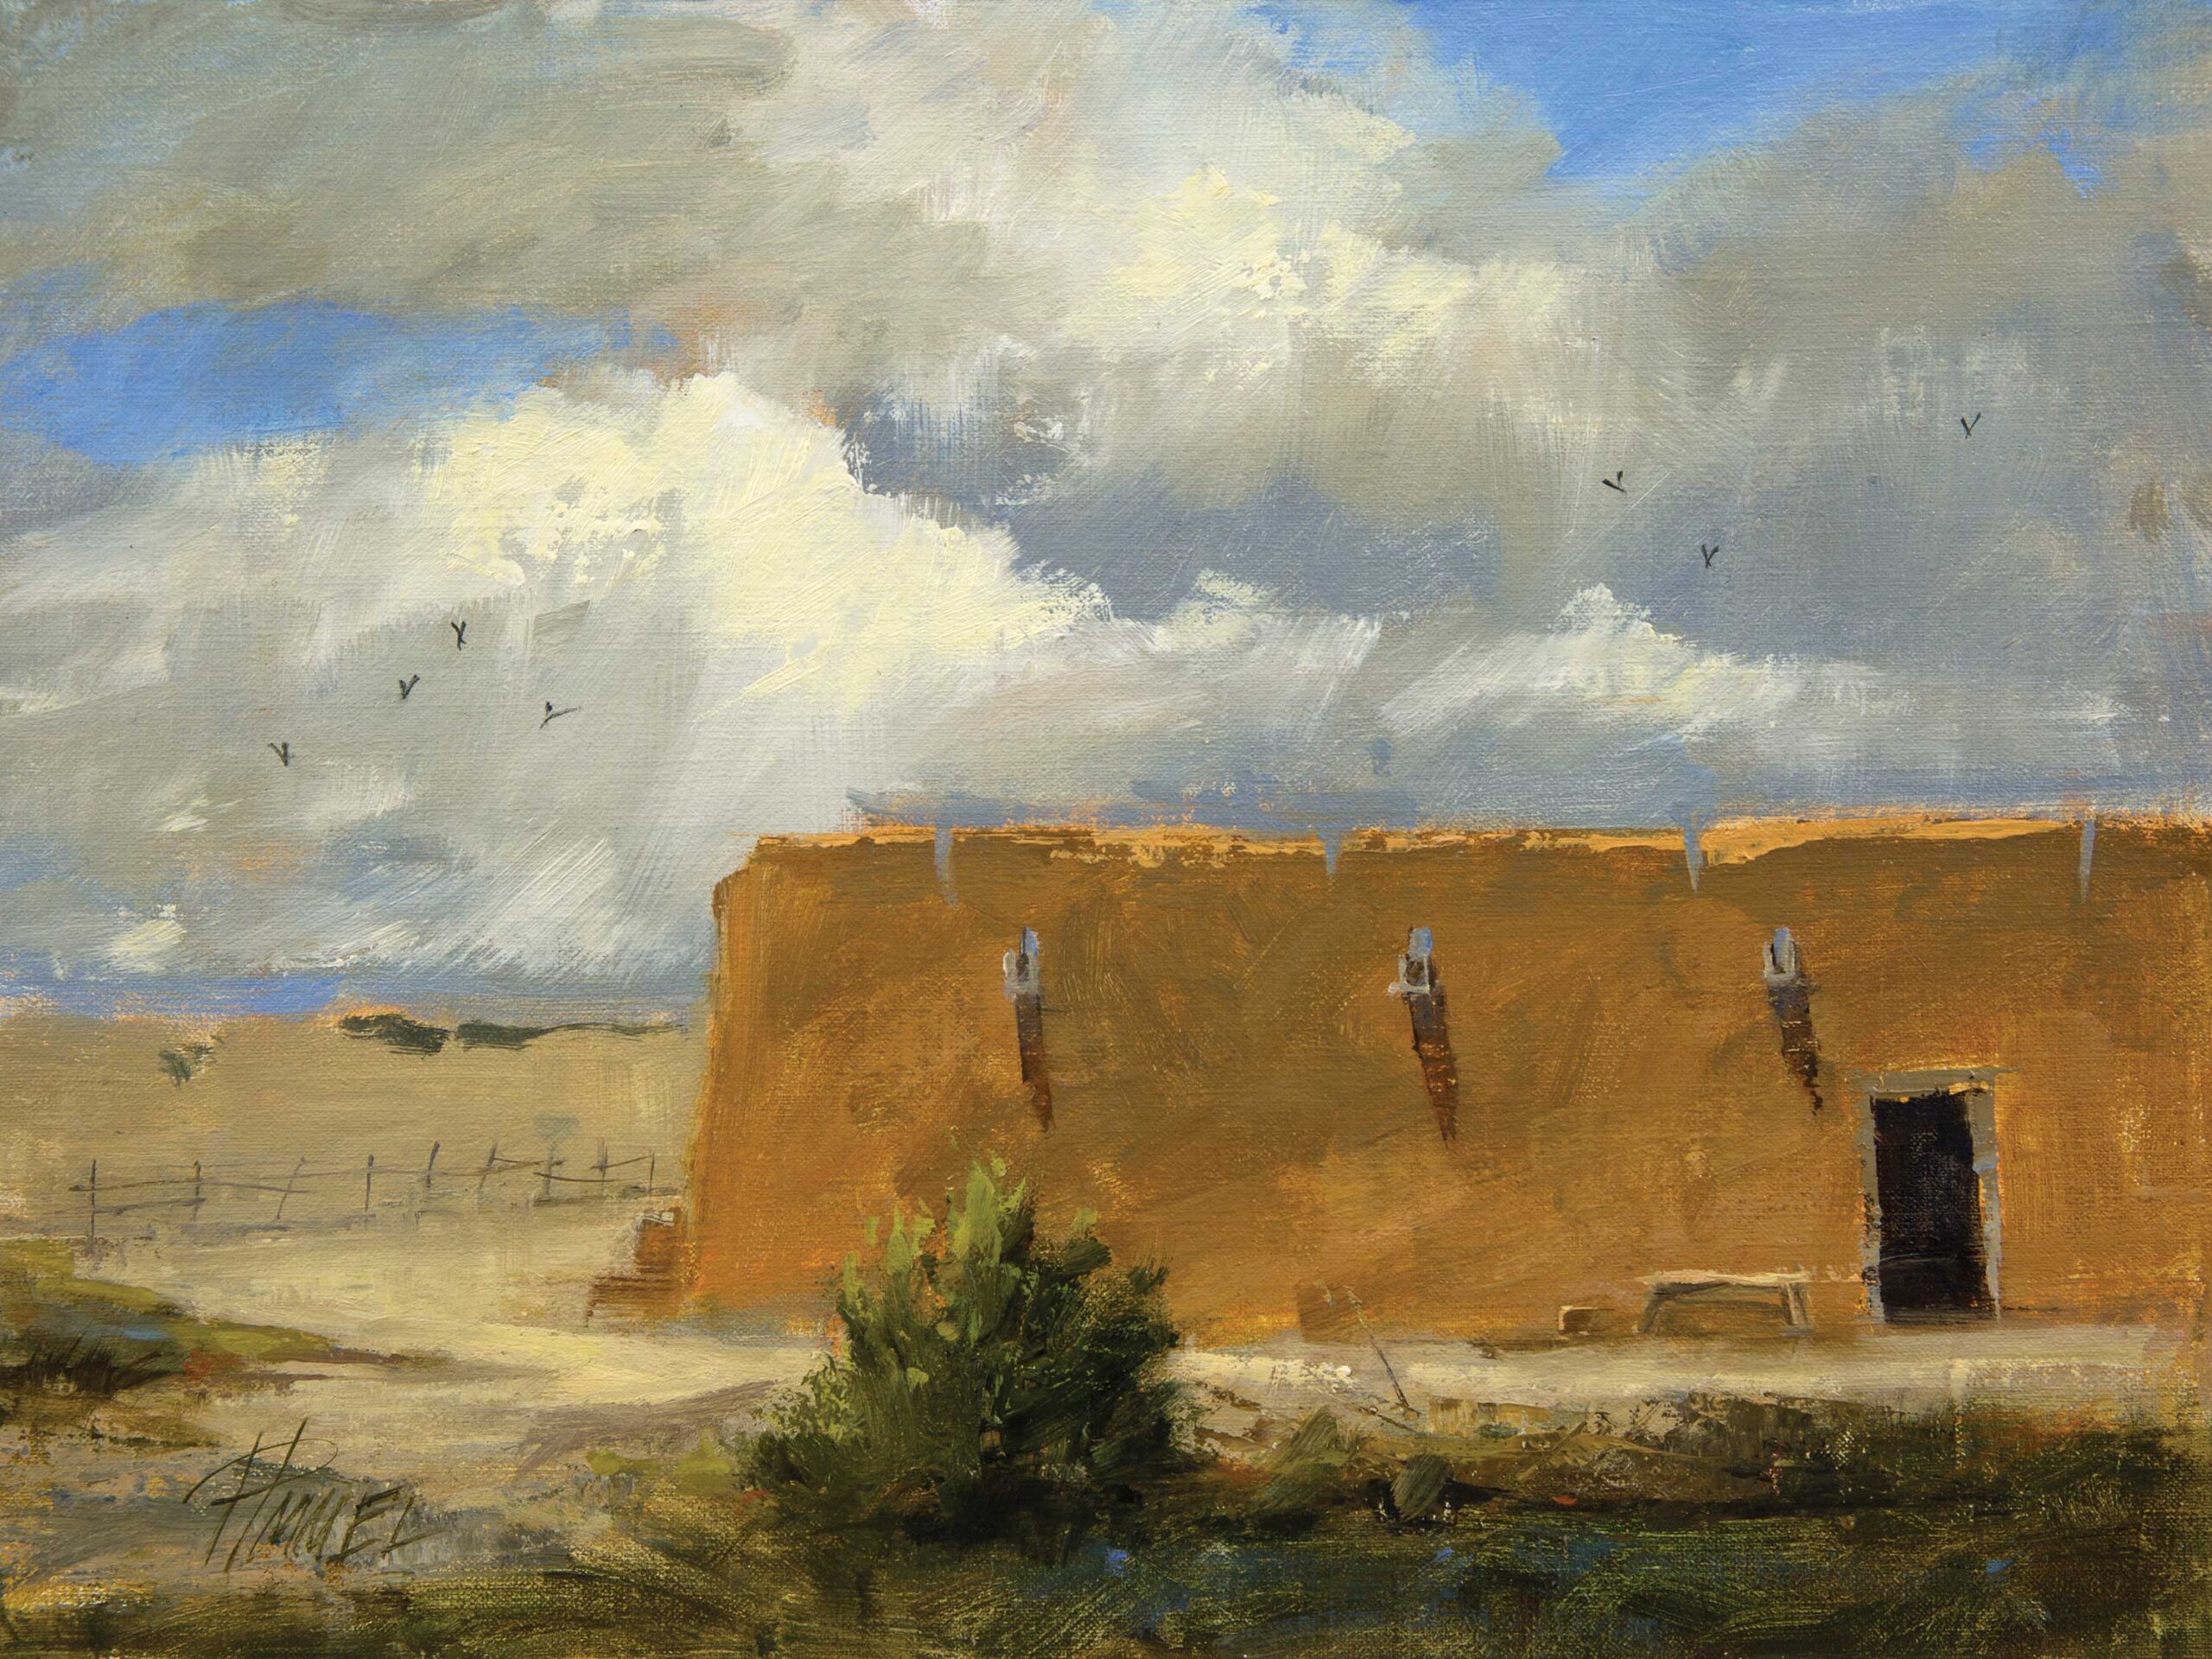 Peggy Immel, "Breezing Up at the Hacienda," 2018, oil, 9 x 12 in., private collection, plein air 